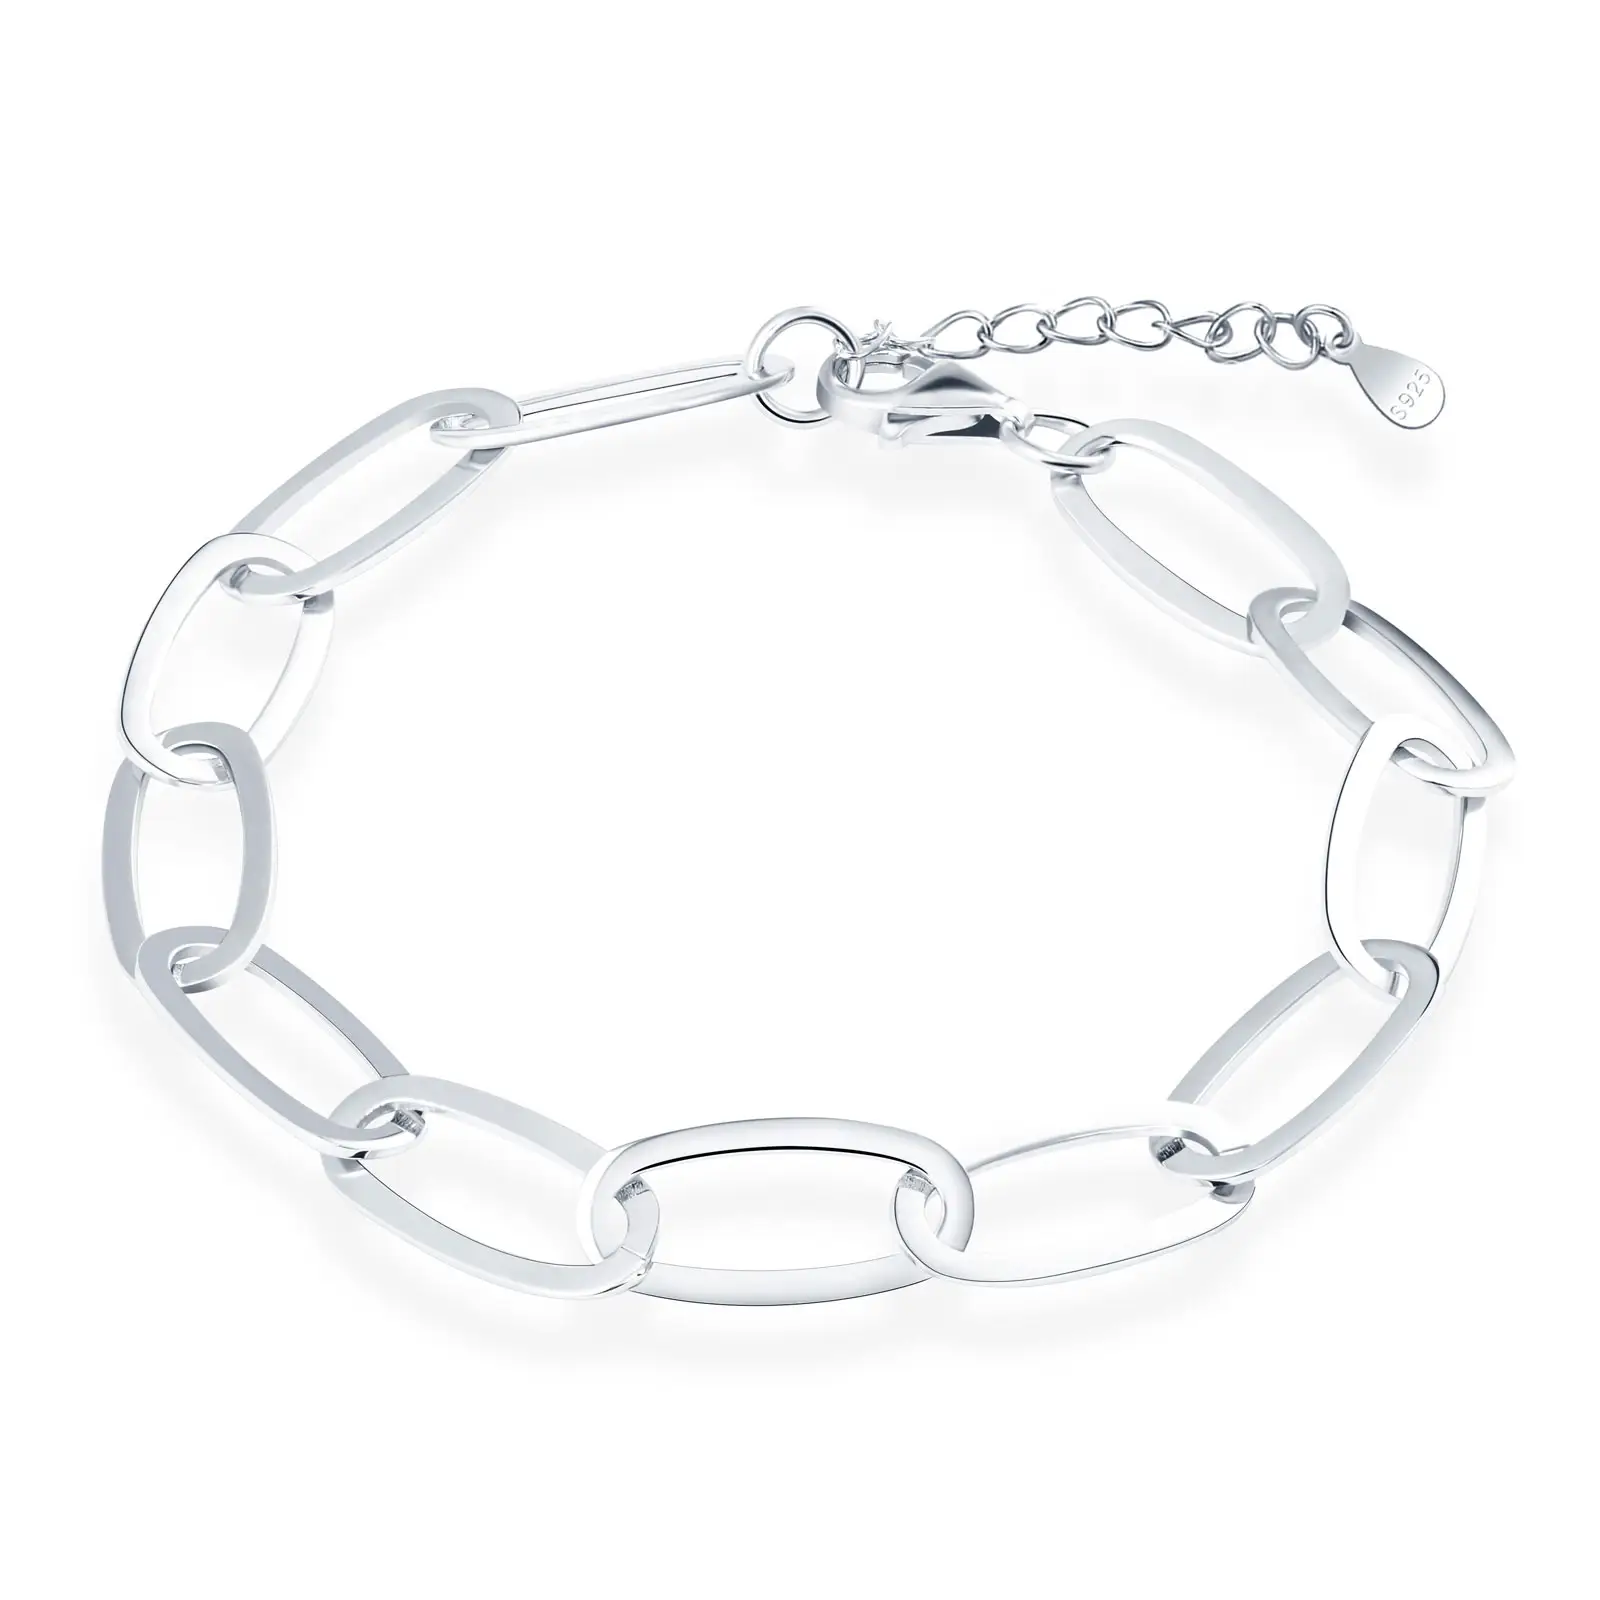 Sólido 925 Sterling Silver Paperclip Link Chain Bracelet para Mulheres Homens Pulseira